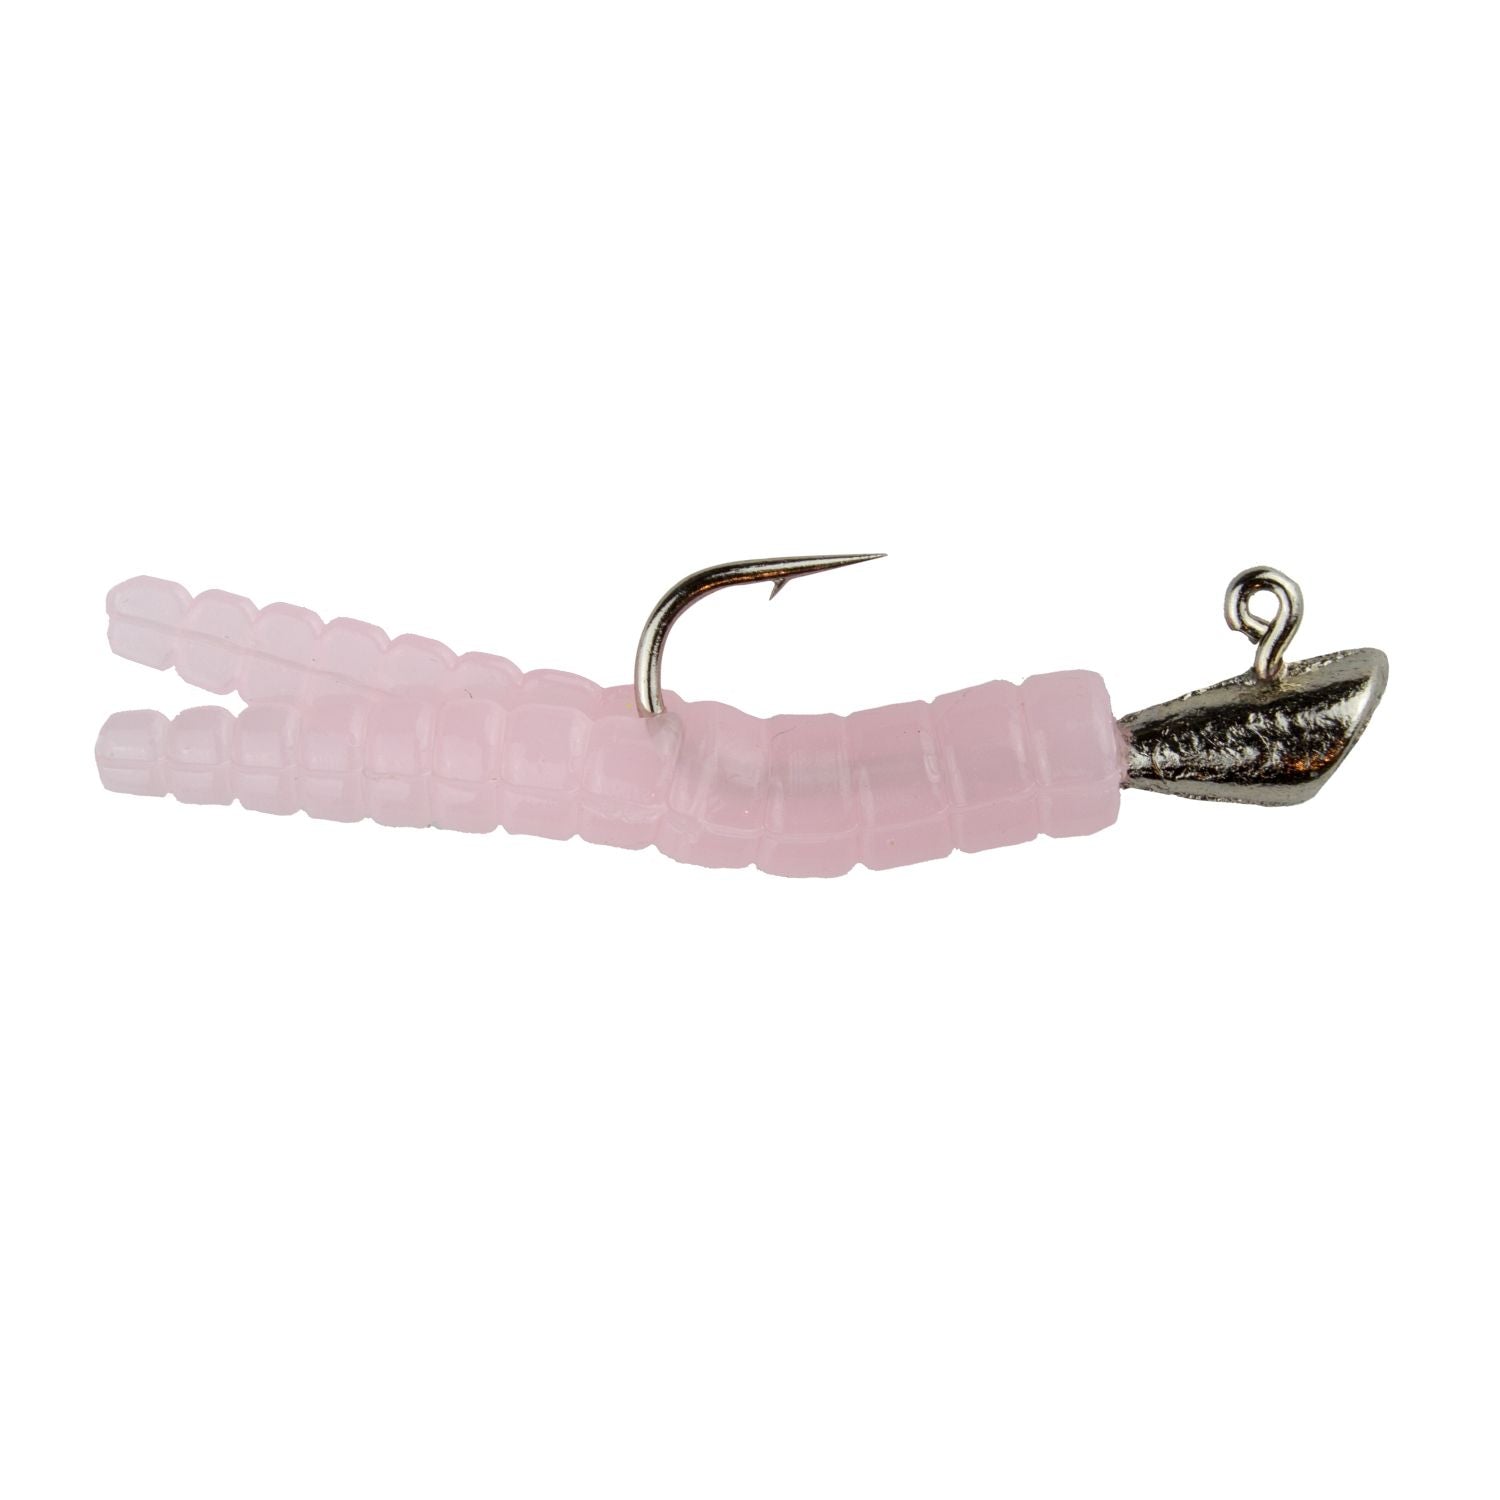 Trout Magnet Neon Kit – TuckerTackle